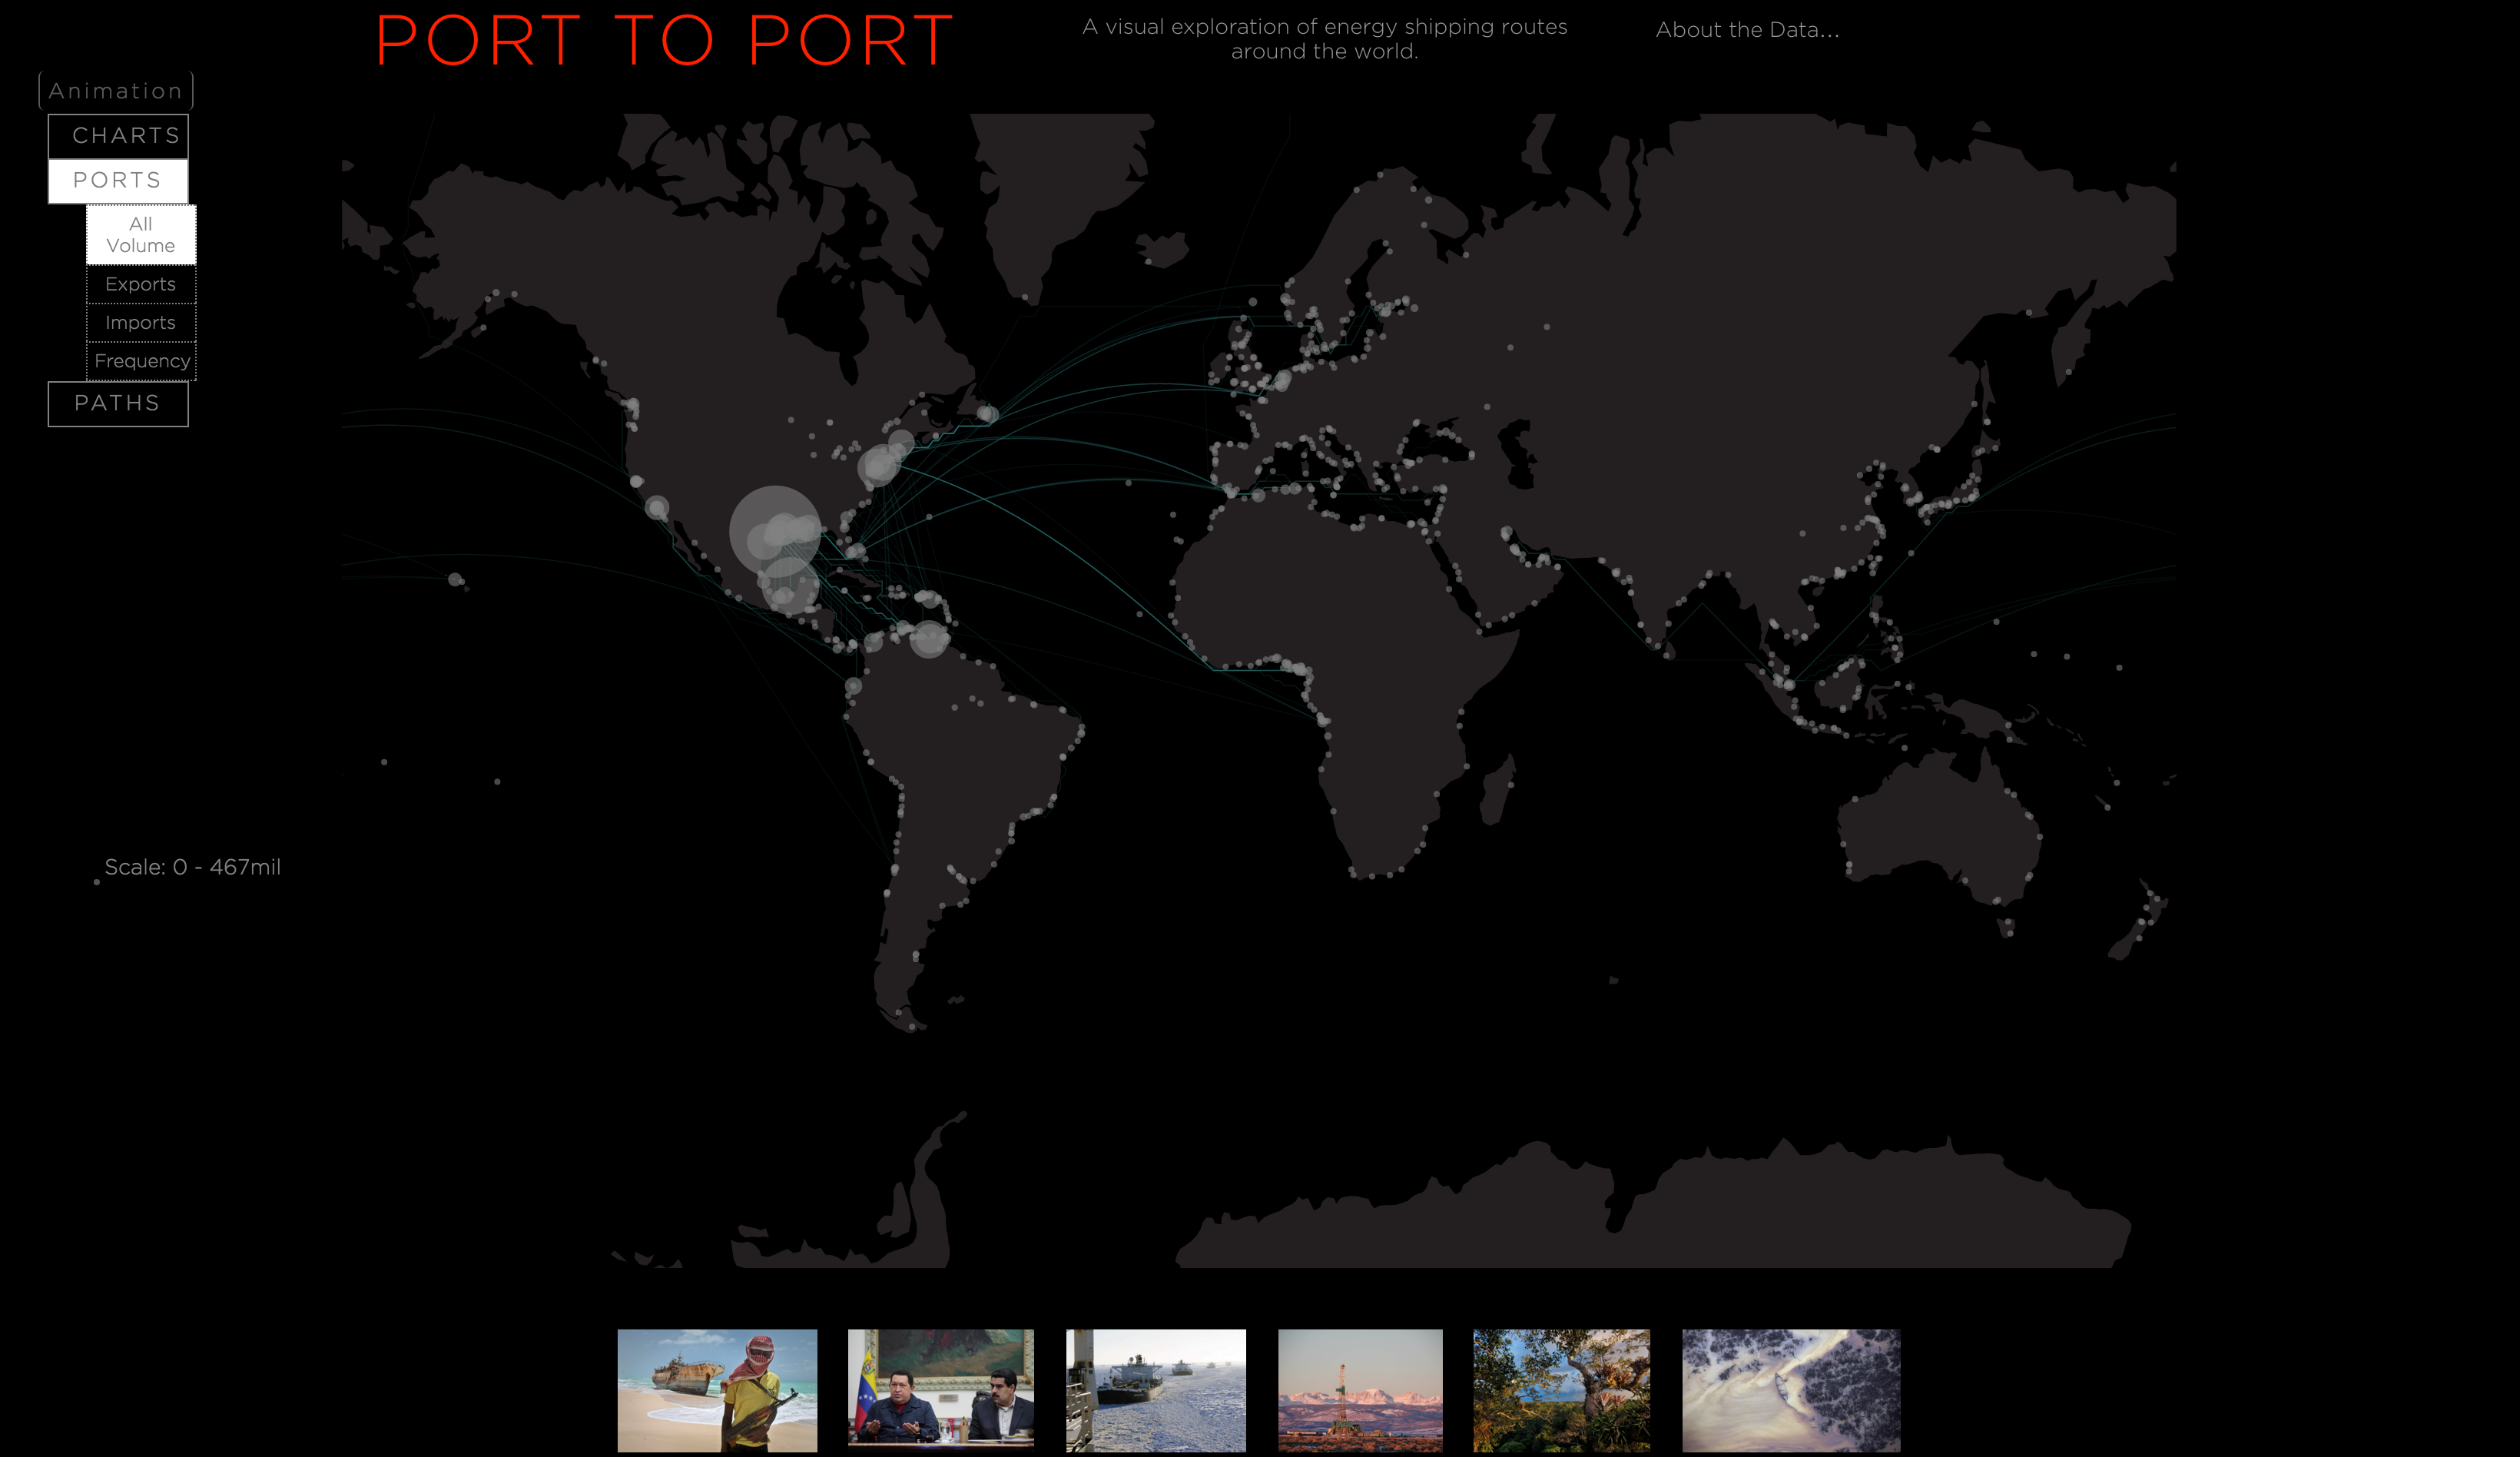 Energy shipping routes of all volumes